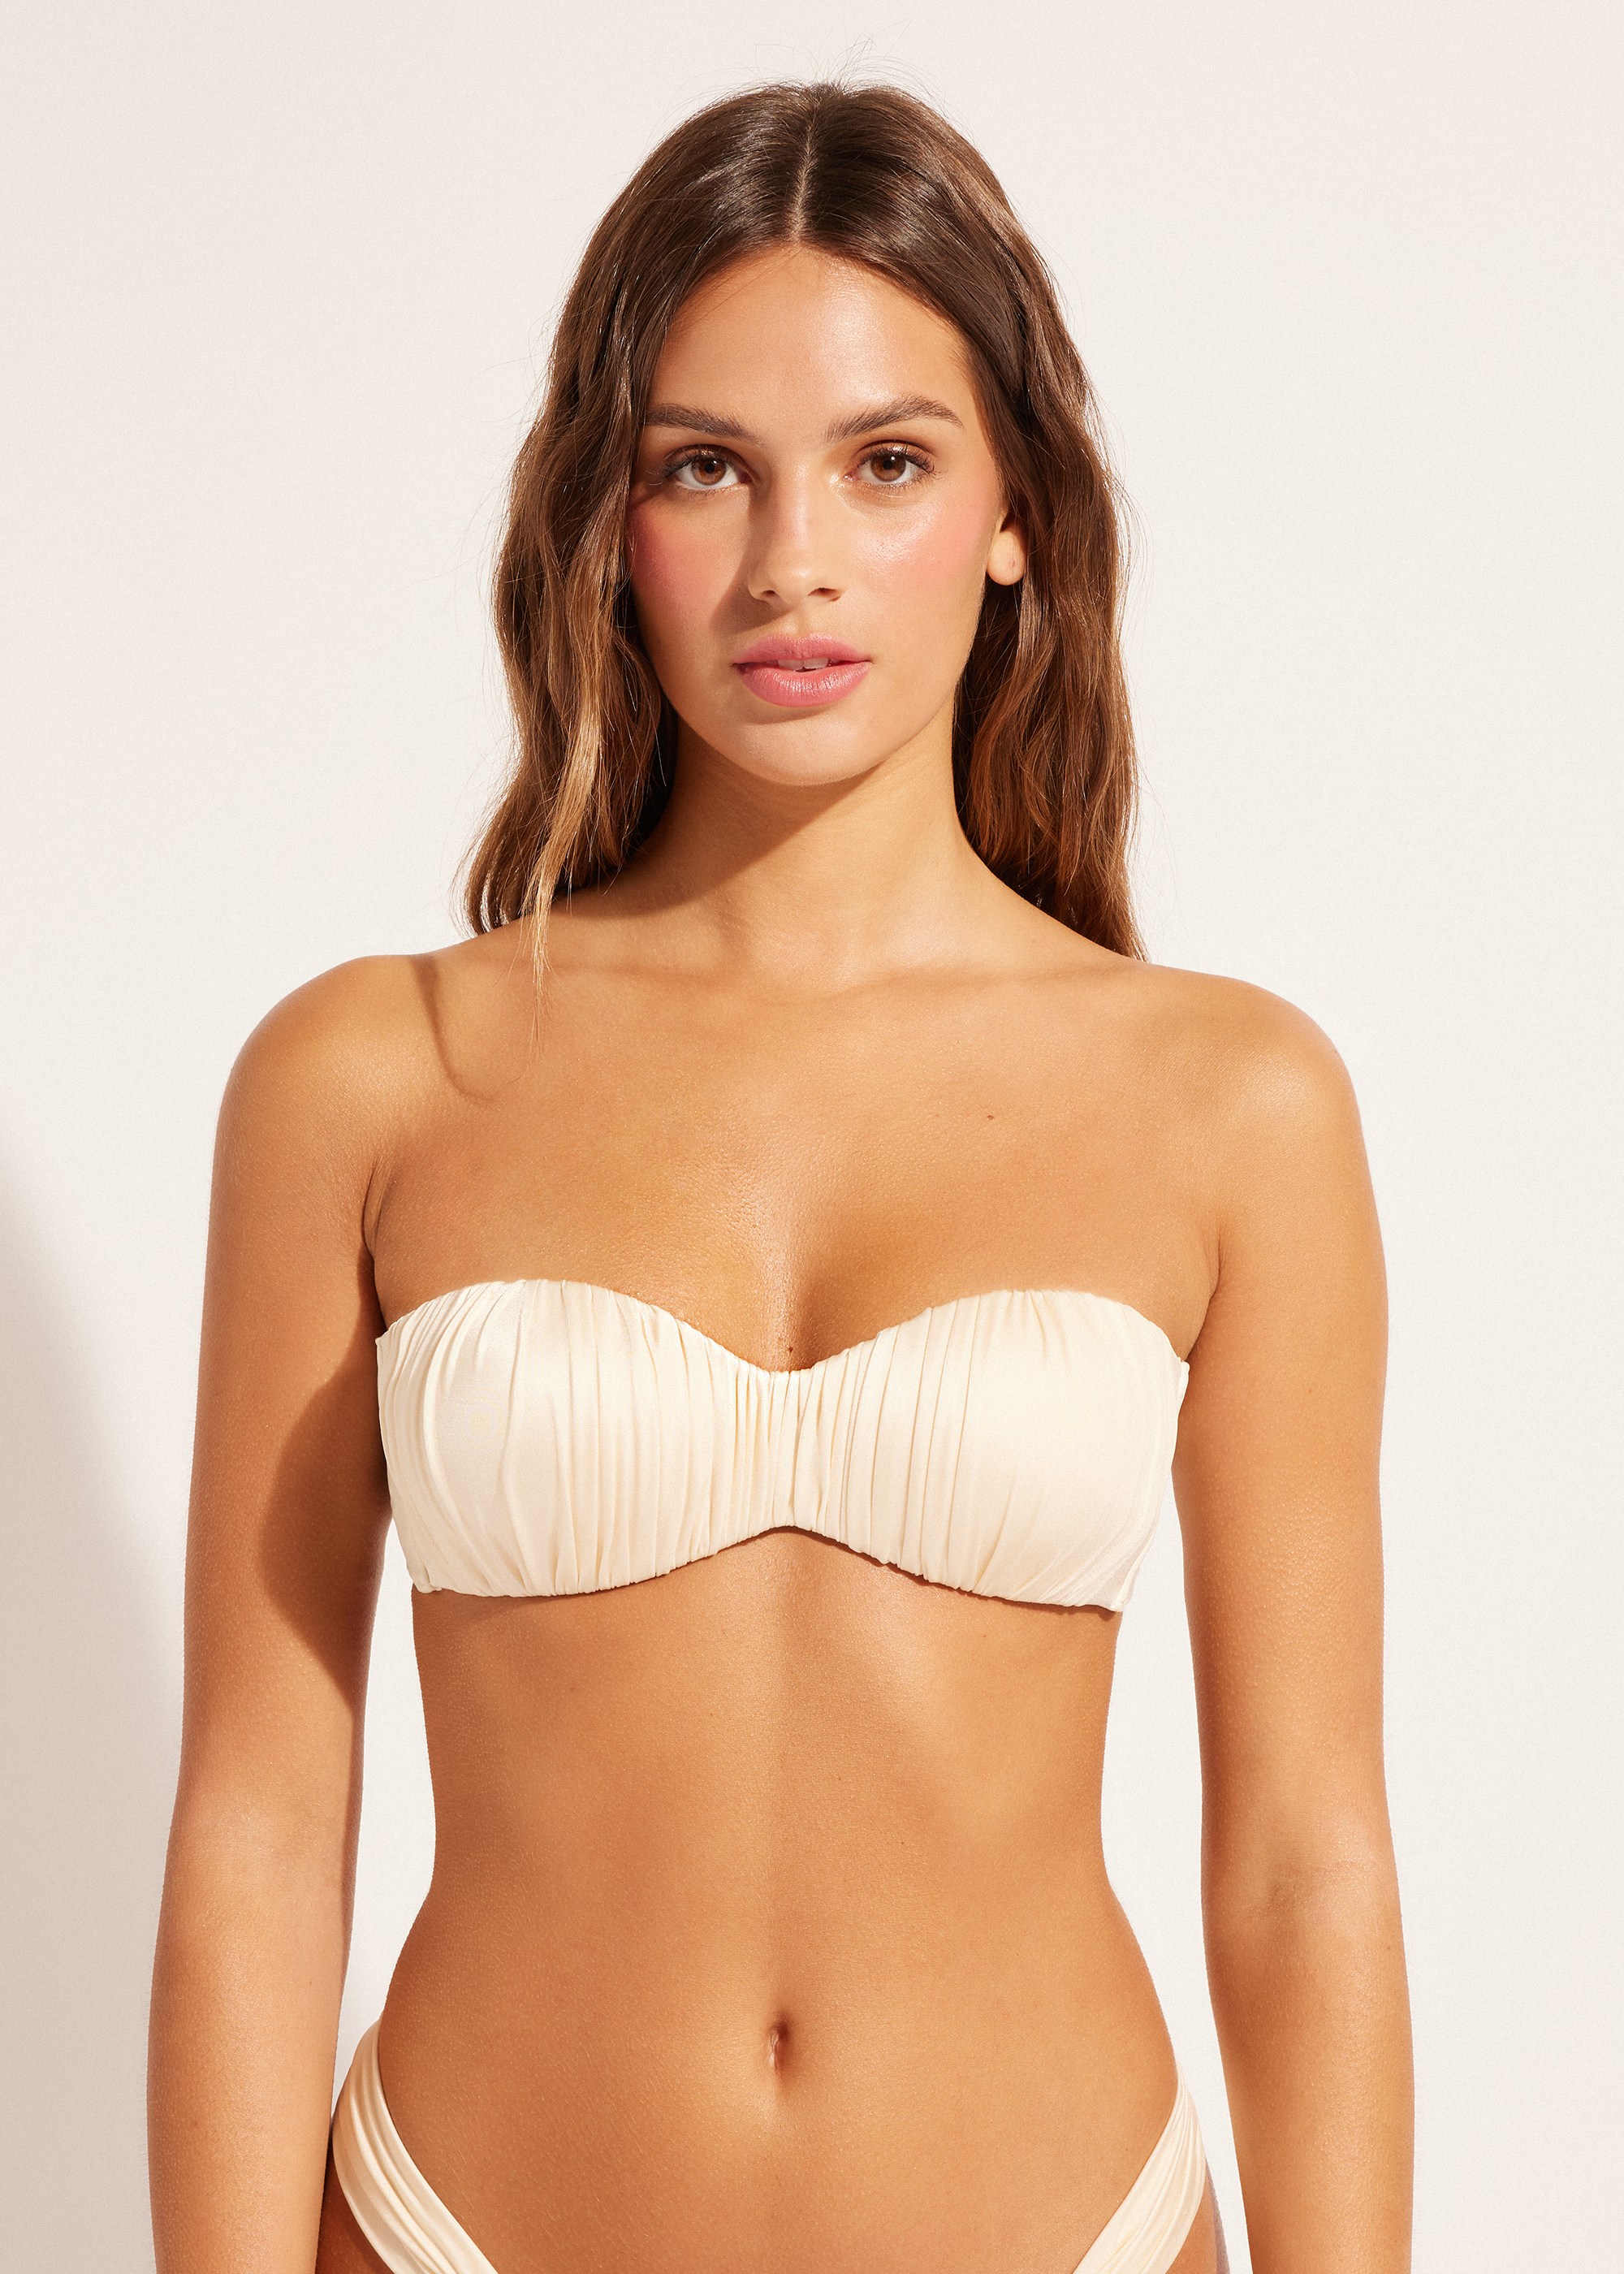 INTIMISSIMI - Today's treatment must include a new strapless bra